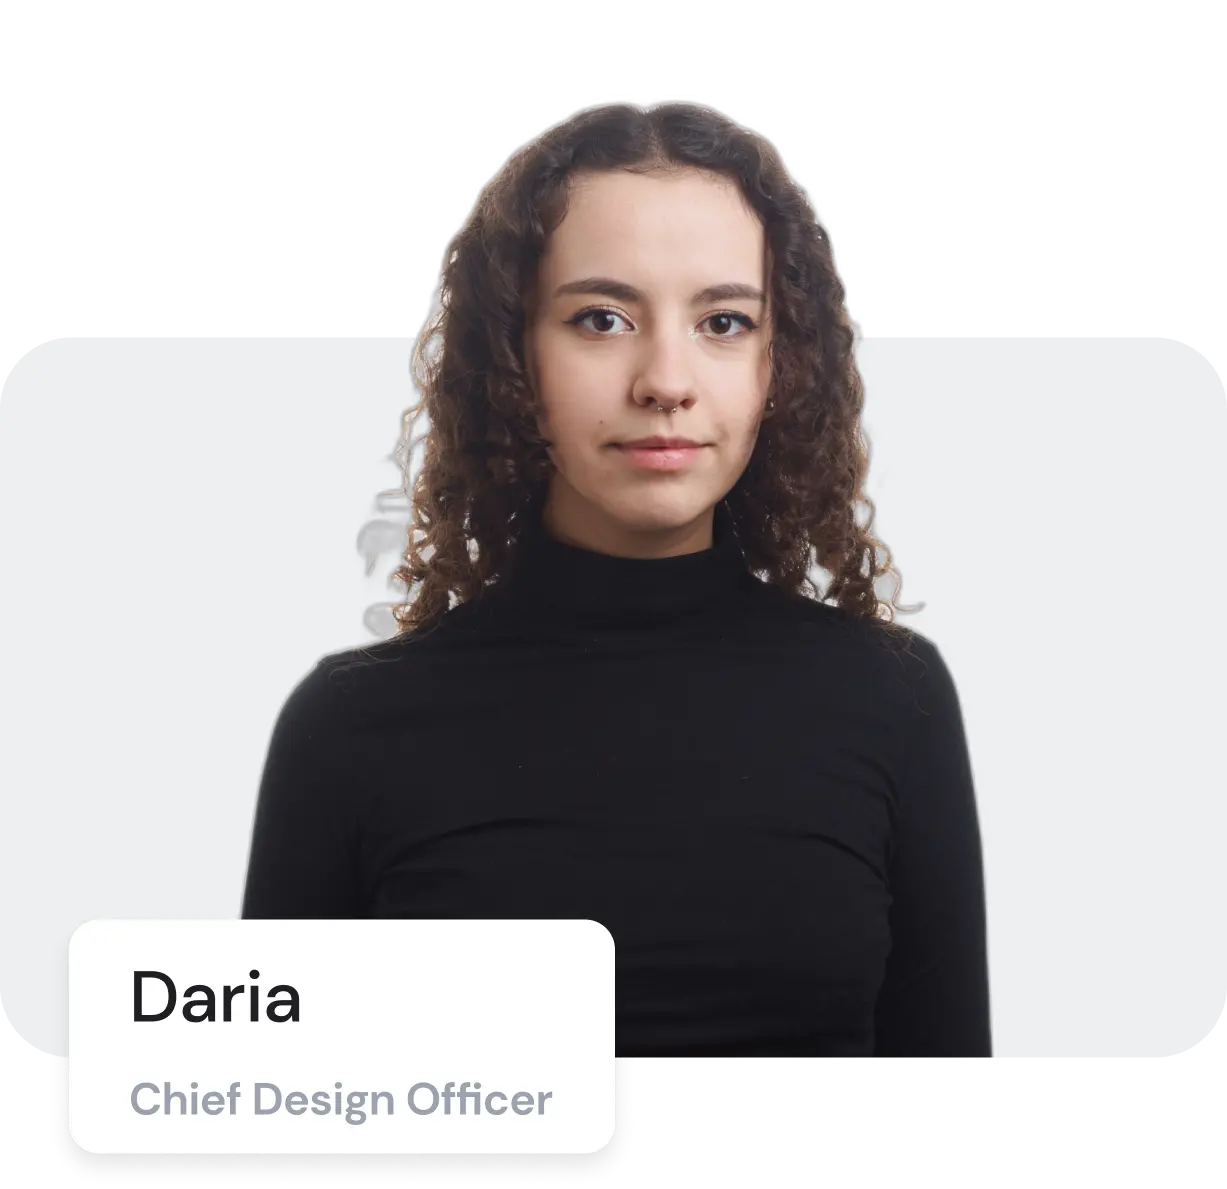 Daria - Chief Design Officer of Limeup